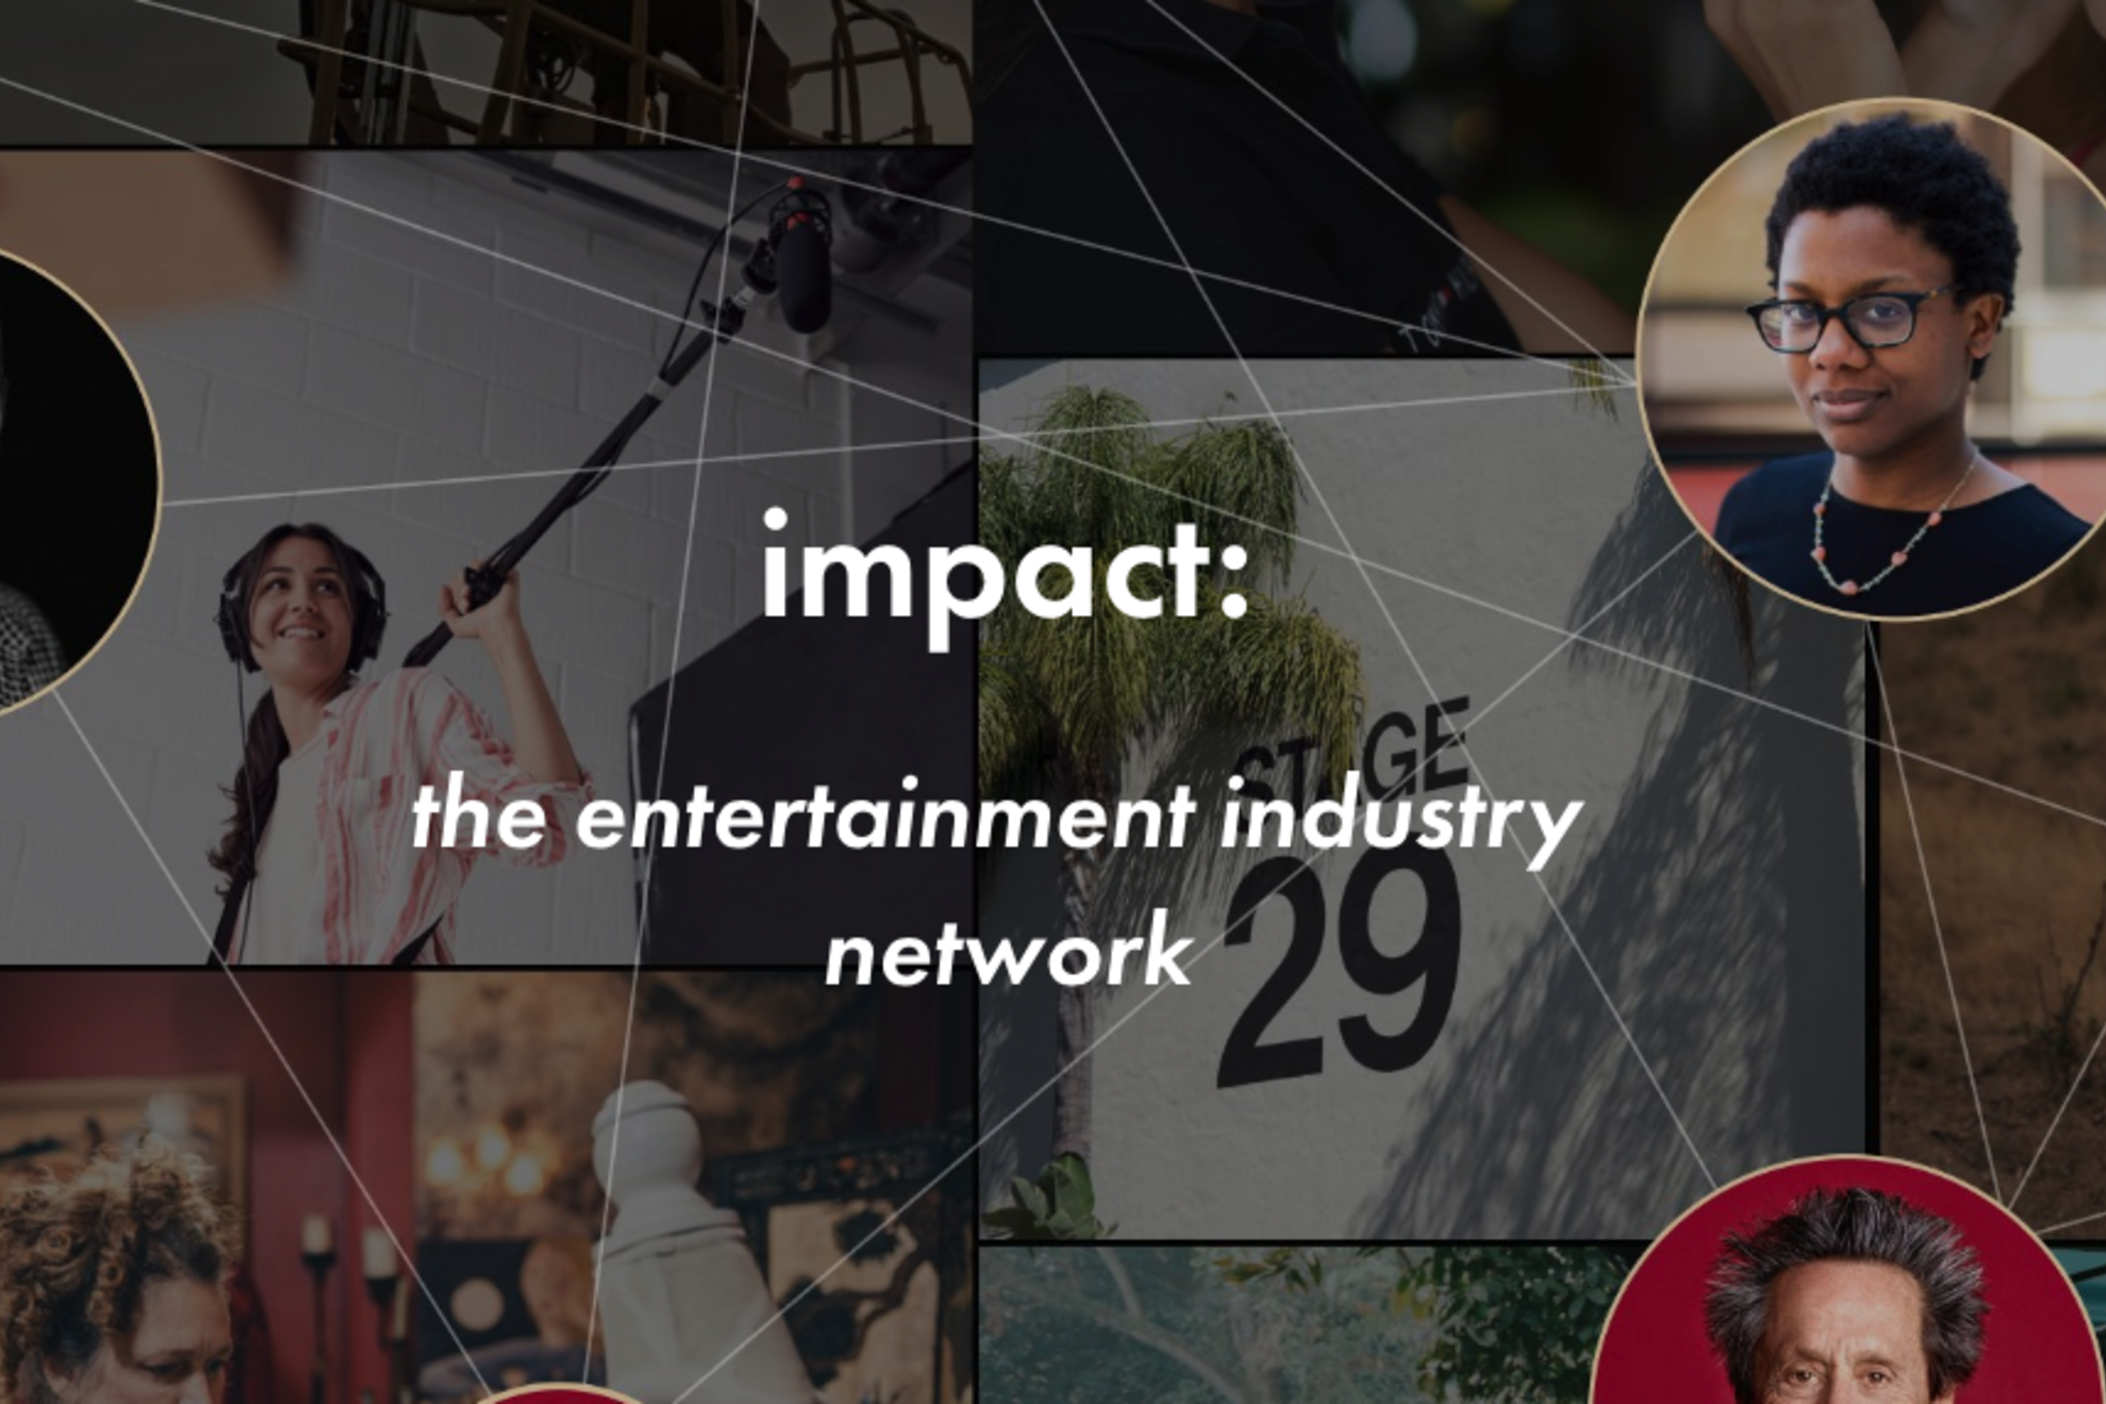 The new professional network Impact hopes to connect film industry workers with productions.